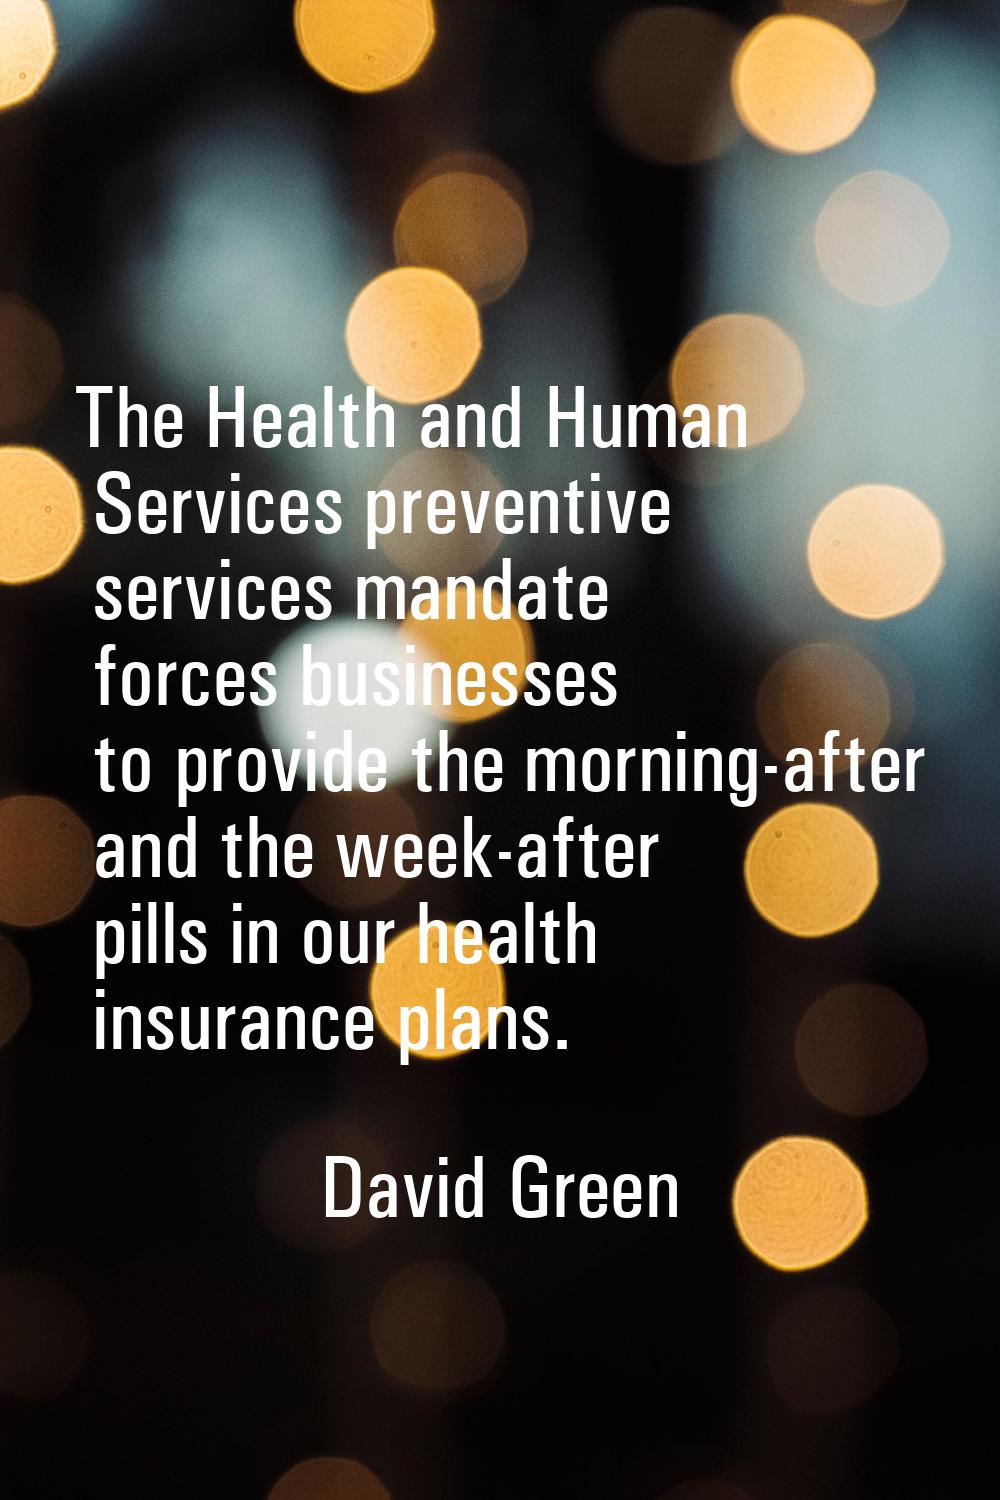 The Health and Human Services preventive services mandate forces businesses to provide the morning-